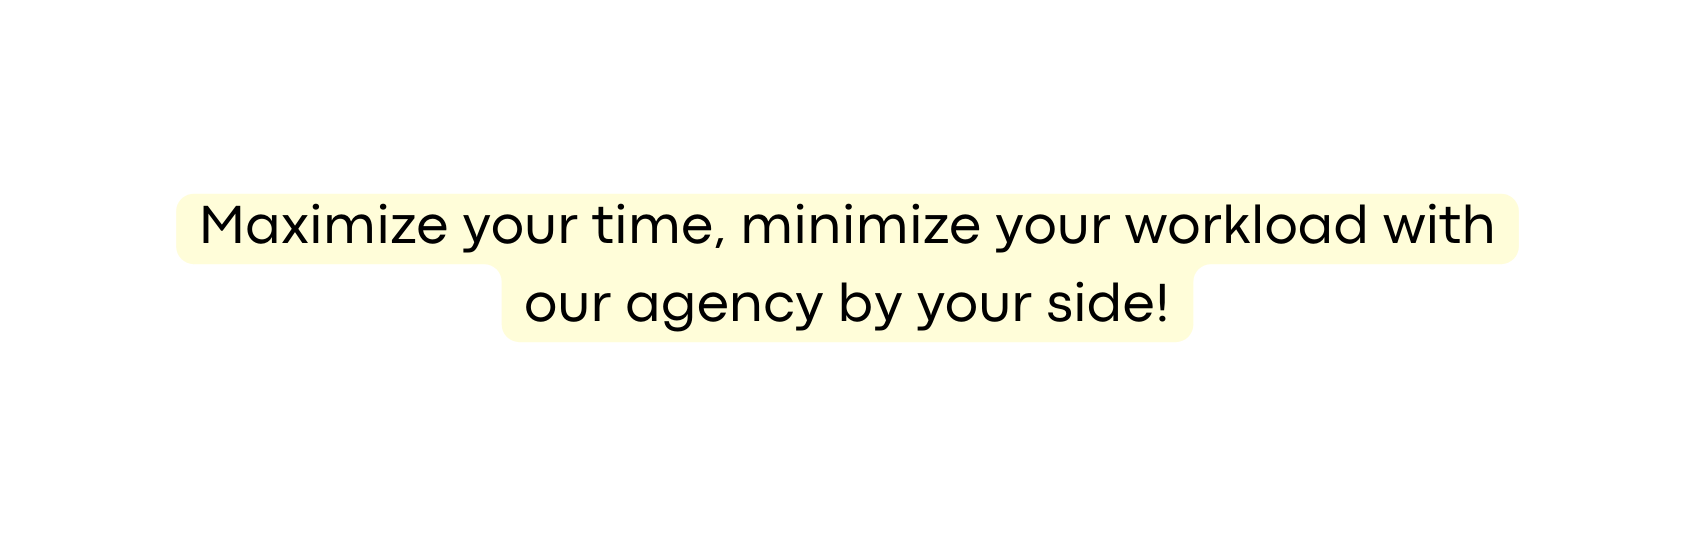 Maximize your time minimize your workload with our agency by your side